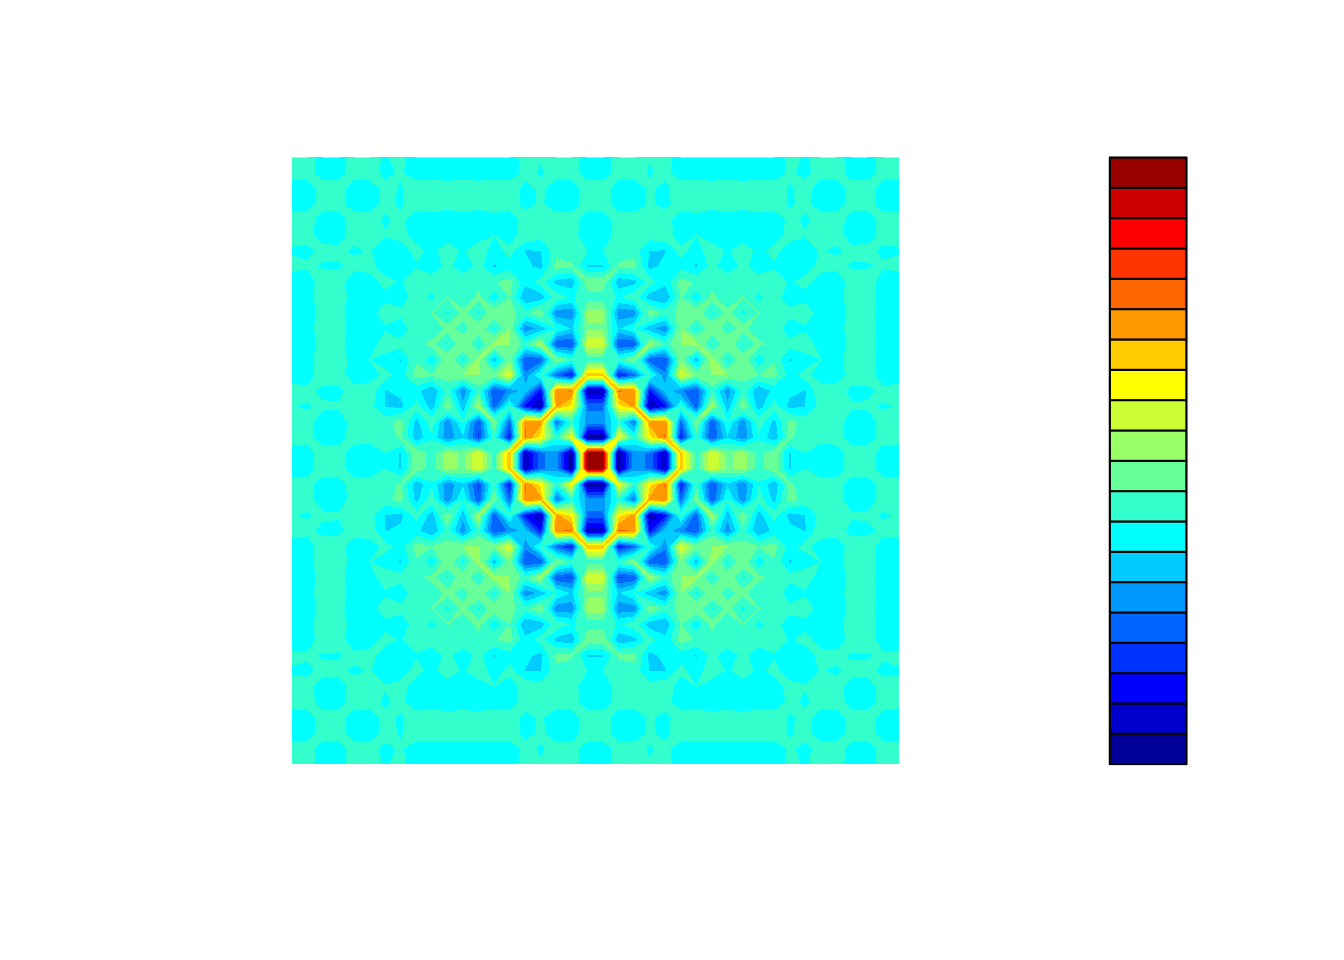 Original view of jet.colors palette from {matlab}.